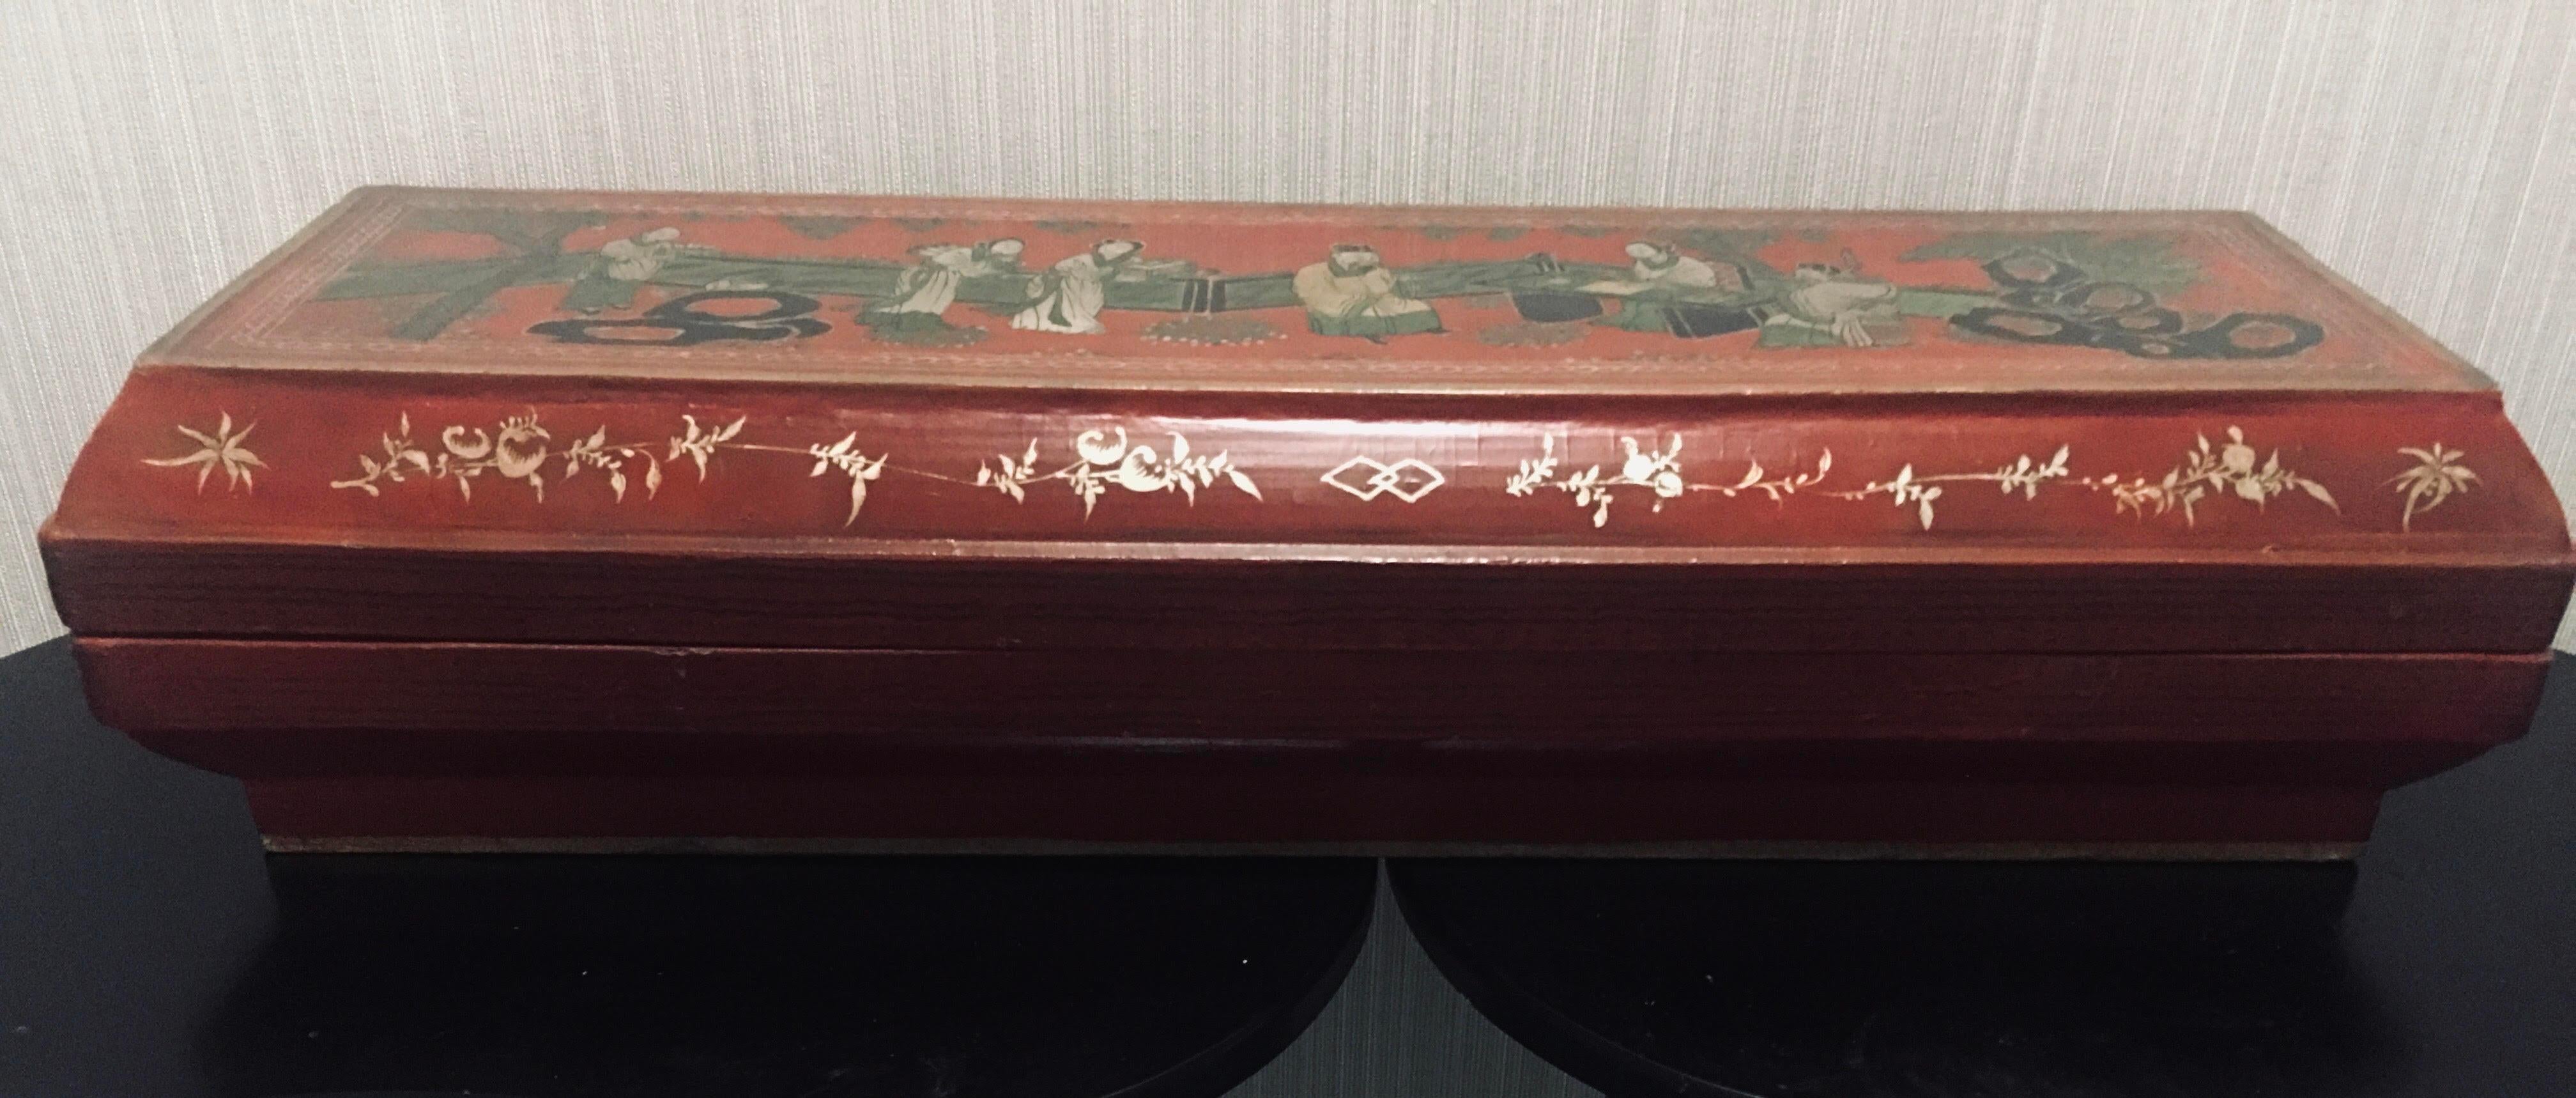 Chinese Mid-to-late 19th Century Qing Dynasty Scroll Box In Good Condition For Sale In New York, NY